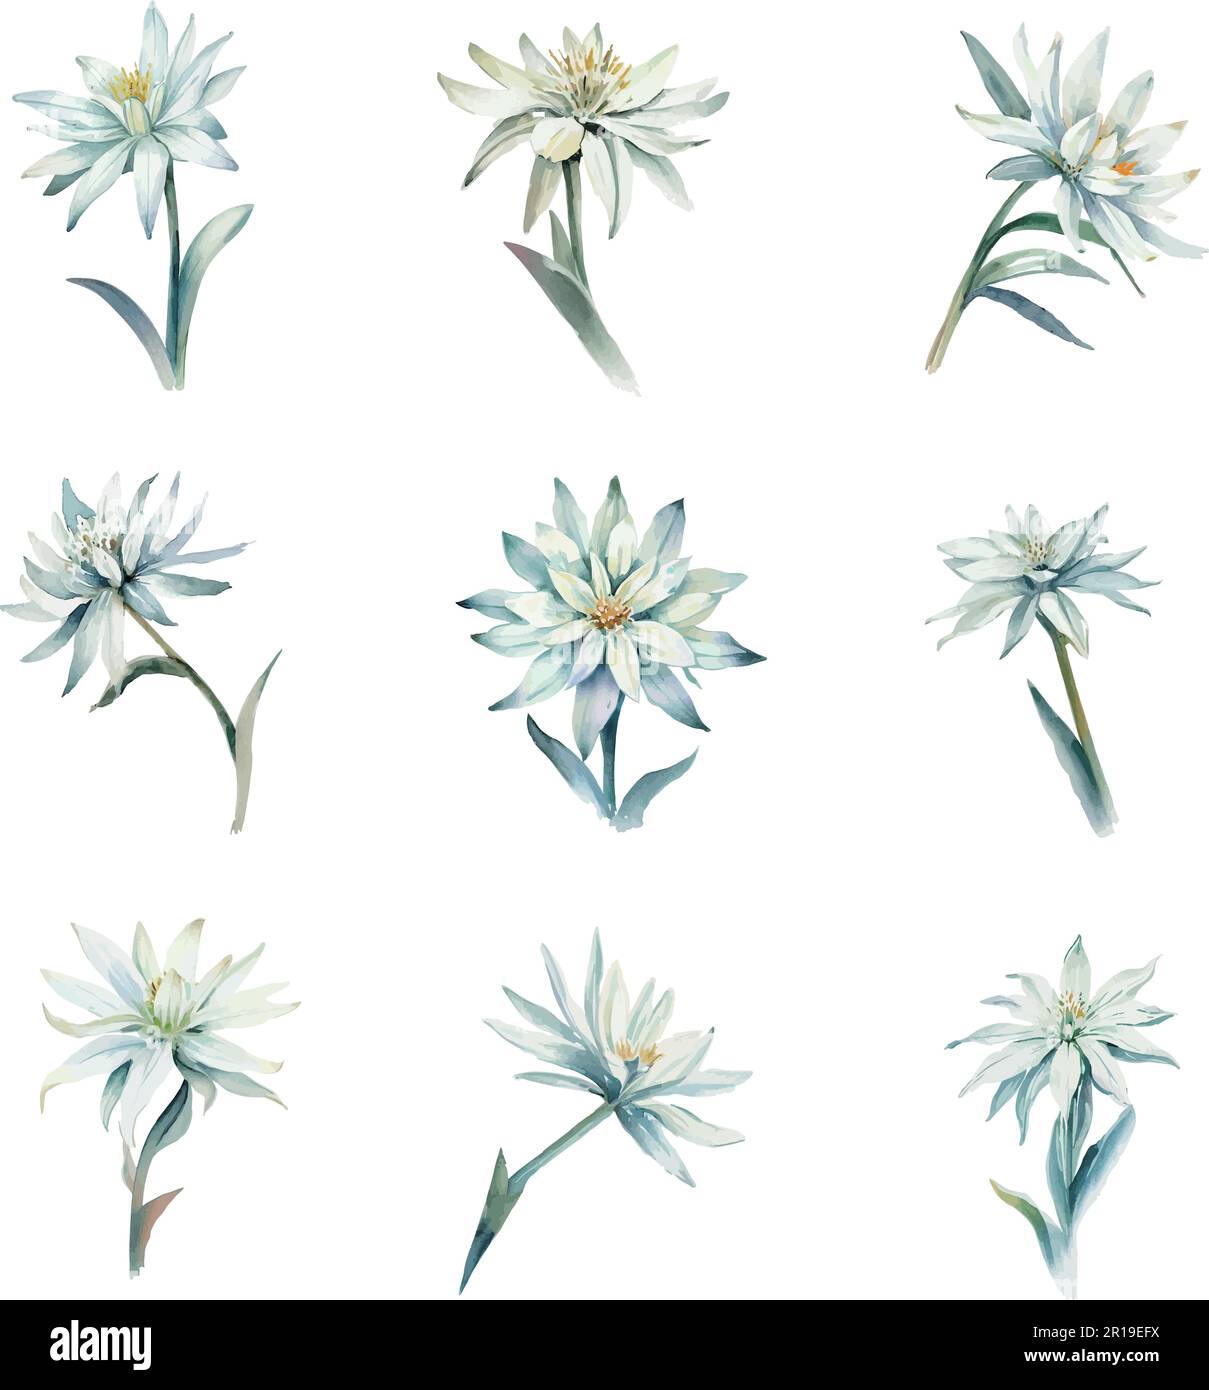 Watercolor set of Edelweiss flower isolated on white background. Hand drawn illustration. Stock Vector